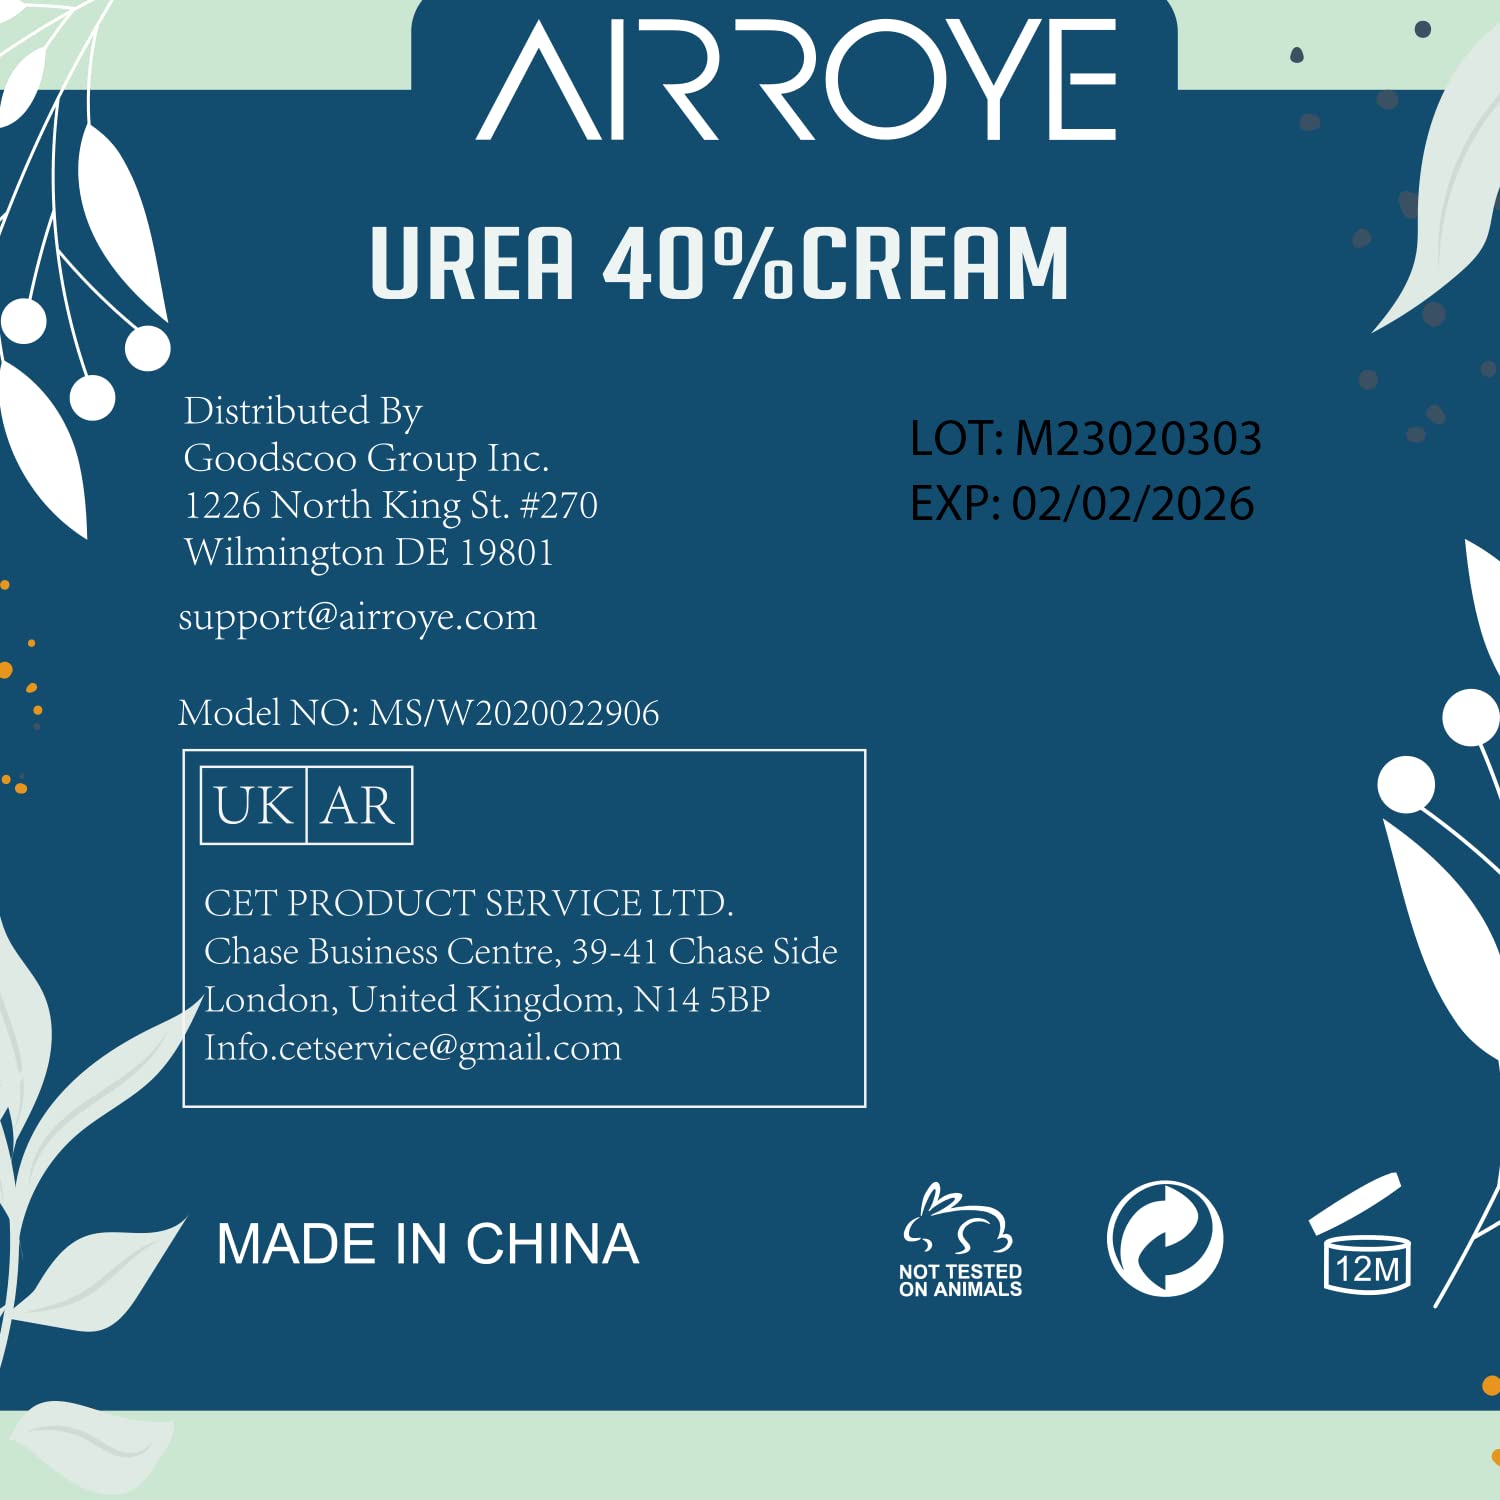 AirroYE Urea 40% Foot Cream,Foot Cream for Cracked Heels and Dry Skin,Natural Moisturizes Nourishes for Dry and Rough Skin. 5.29OZ